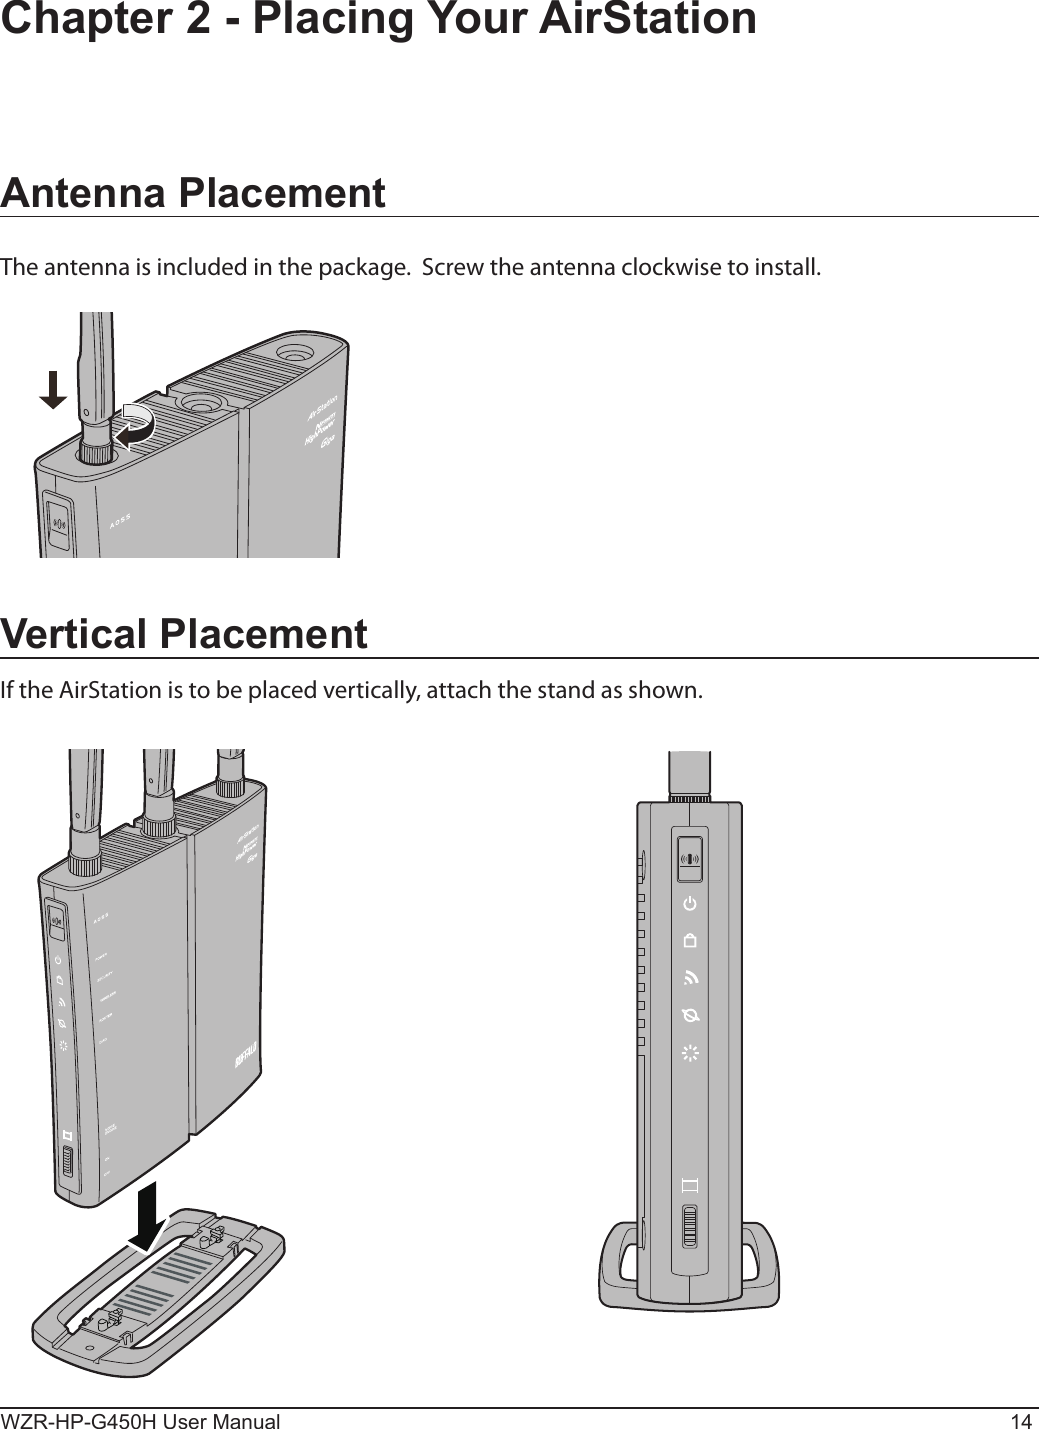 WZR-HP-G450H User Manual 14Chapter 2 - Placing Your AirStationVertical PlacementIf the AirStation is to be placed vertically, attach the stand as shown.Antenna PlacementThe antenna is included in the package.  Screw the antenna clockwise to install.